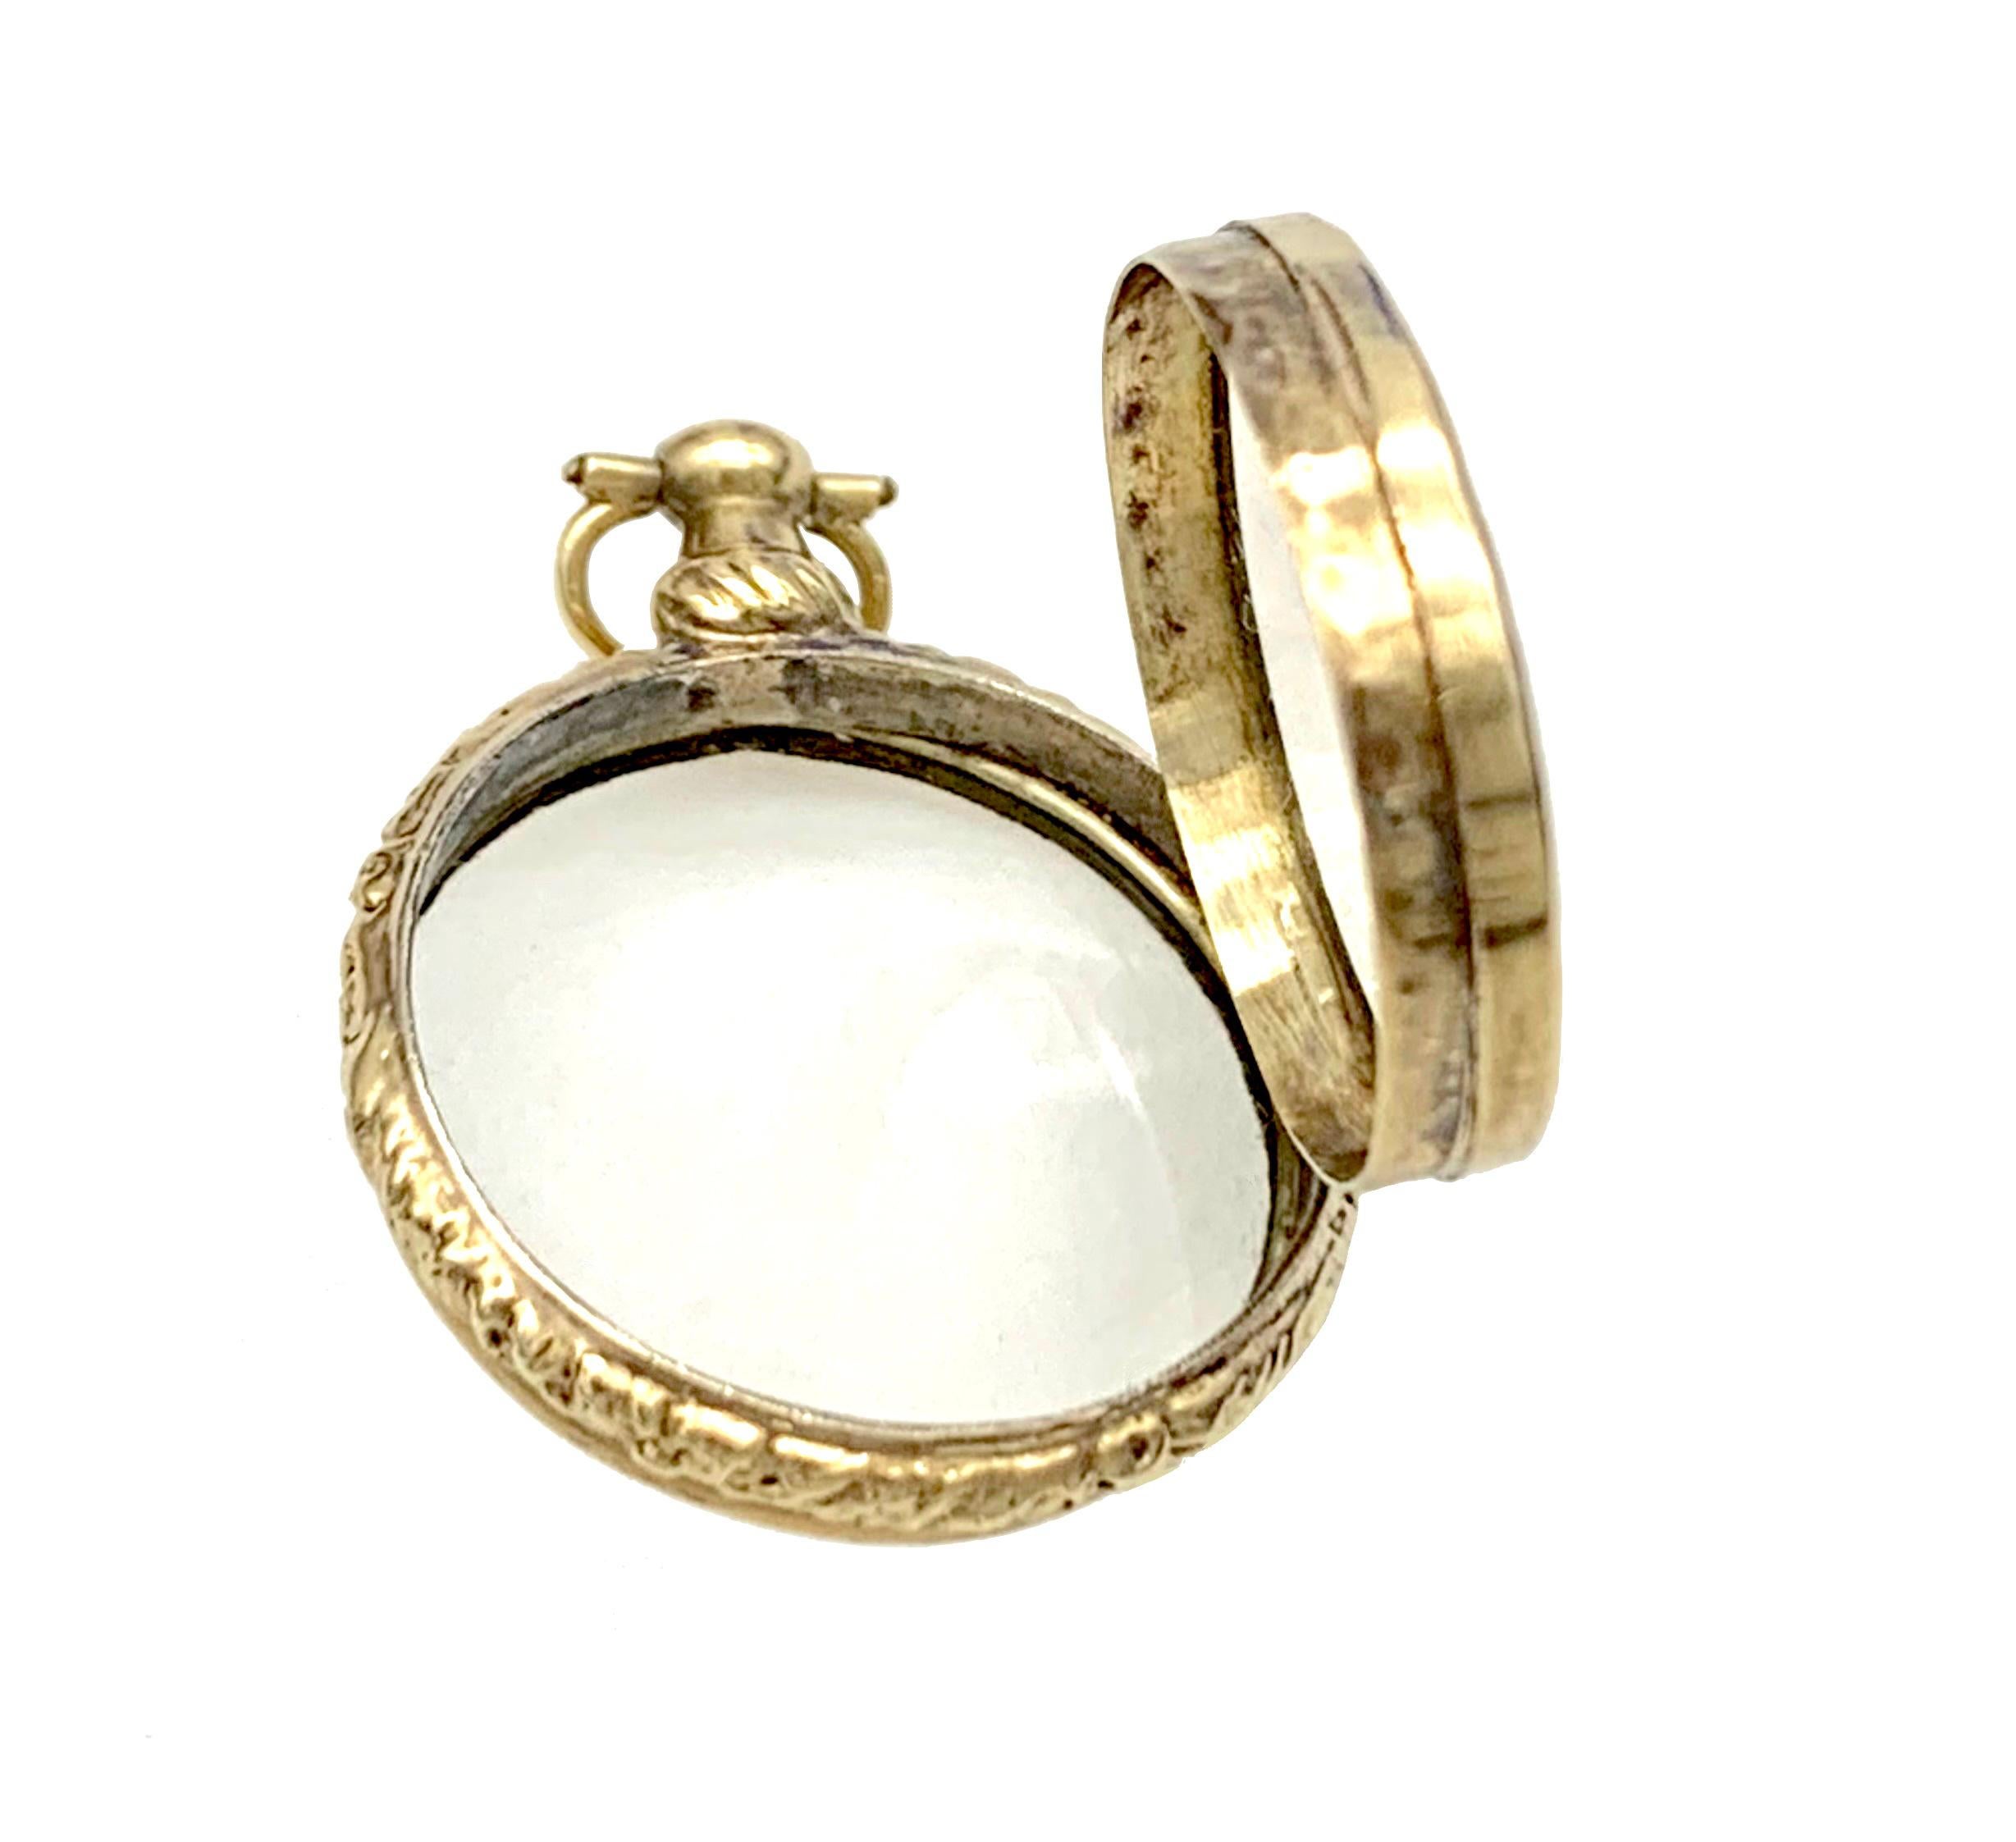 This elegant little georgian gold locket pendant was made around 1820. The 14 karat gold locked mount is finely chased all around with flowers and foliage. Each side of the locket is set with a domed rock crystal. The rock crystal has a slightly